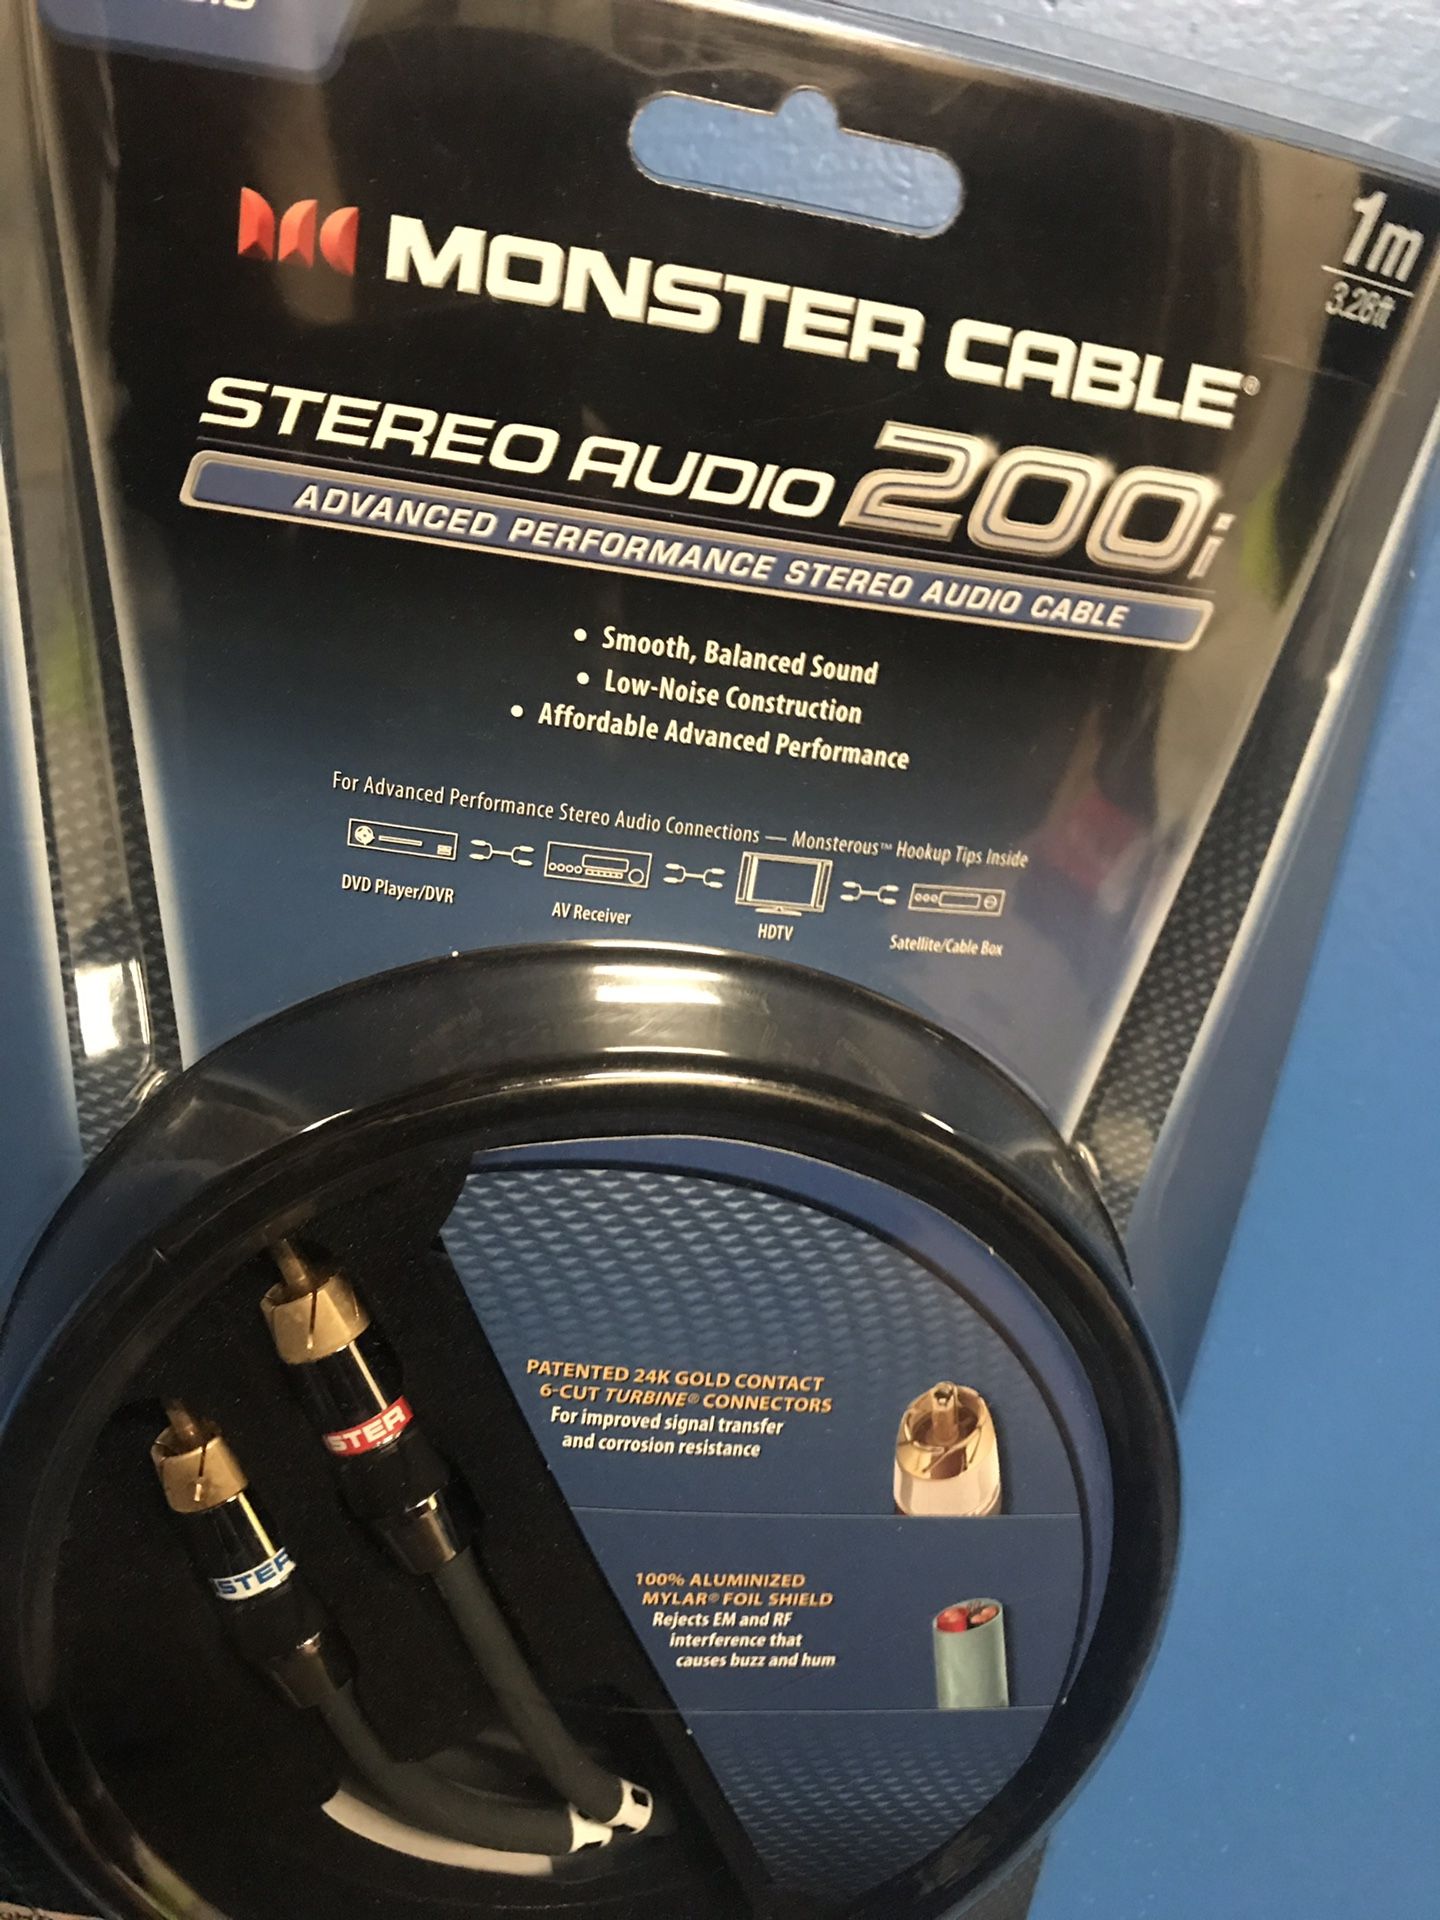 Monster cable stereo audio 200¡